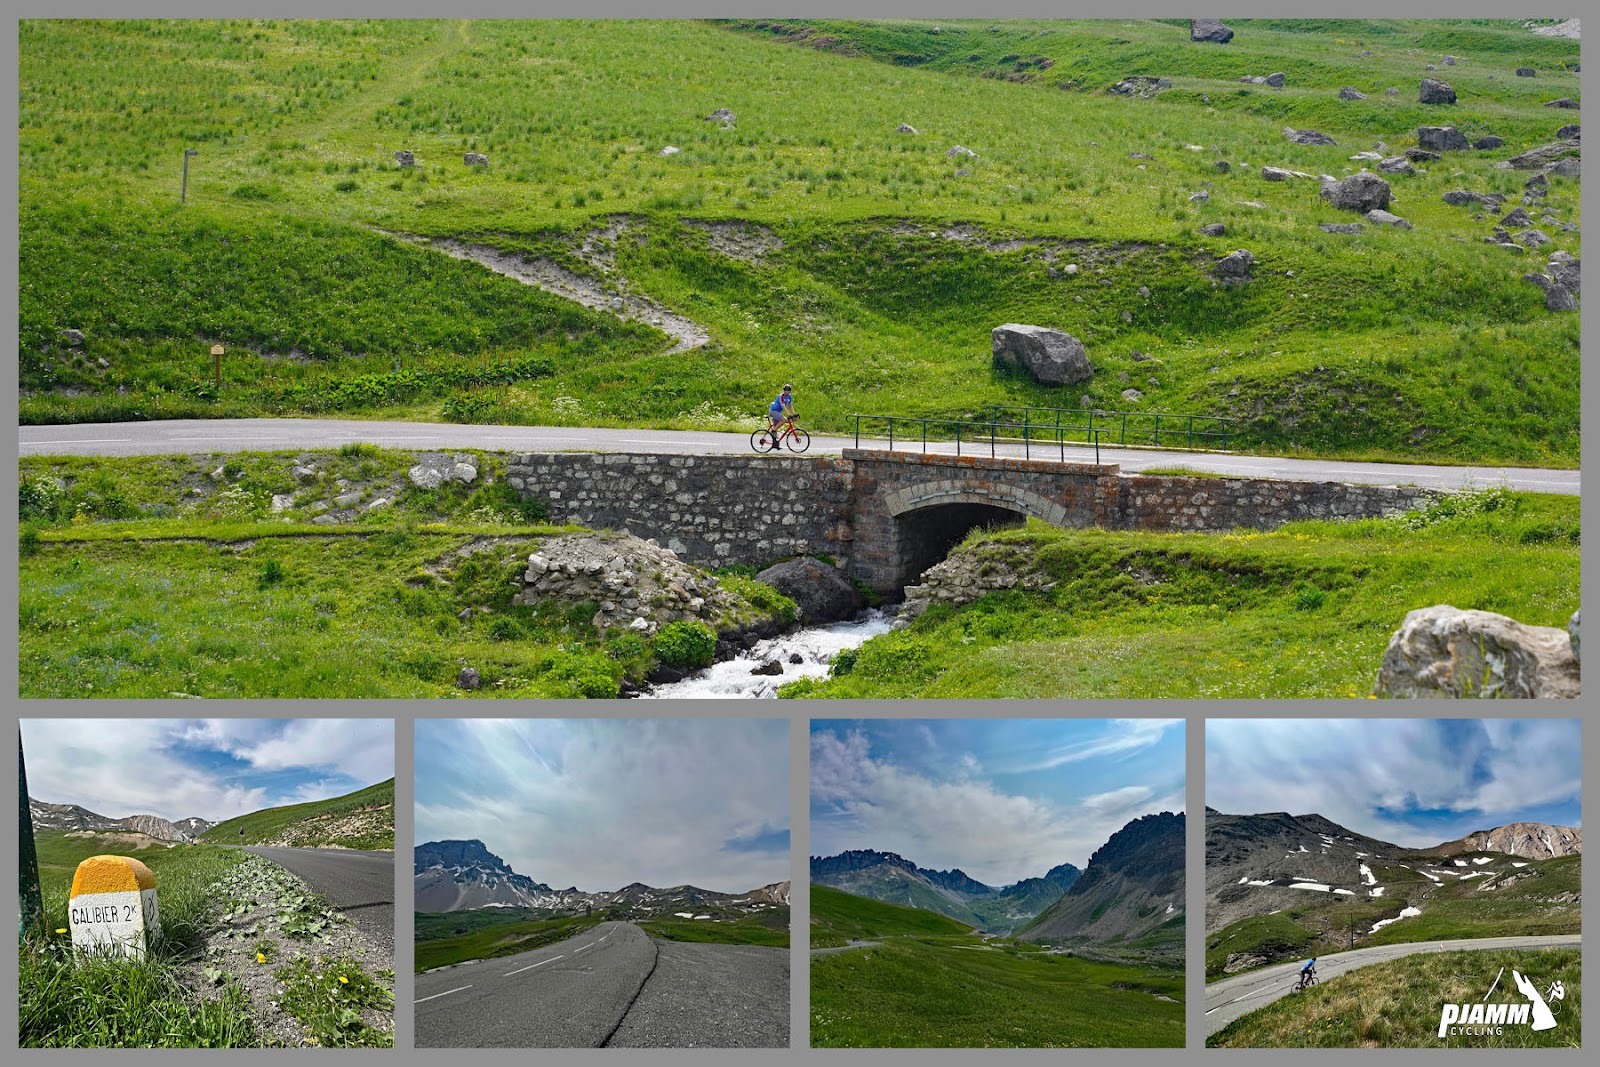 Cycling Col du Galibier from Valloire: photo collage shows green hillsides, cobble bridge over small stream, and patches of snow along the final third of the climb